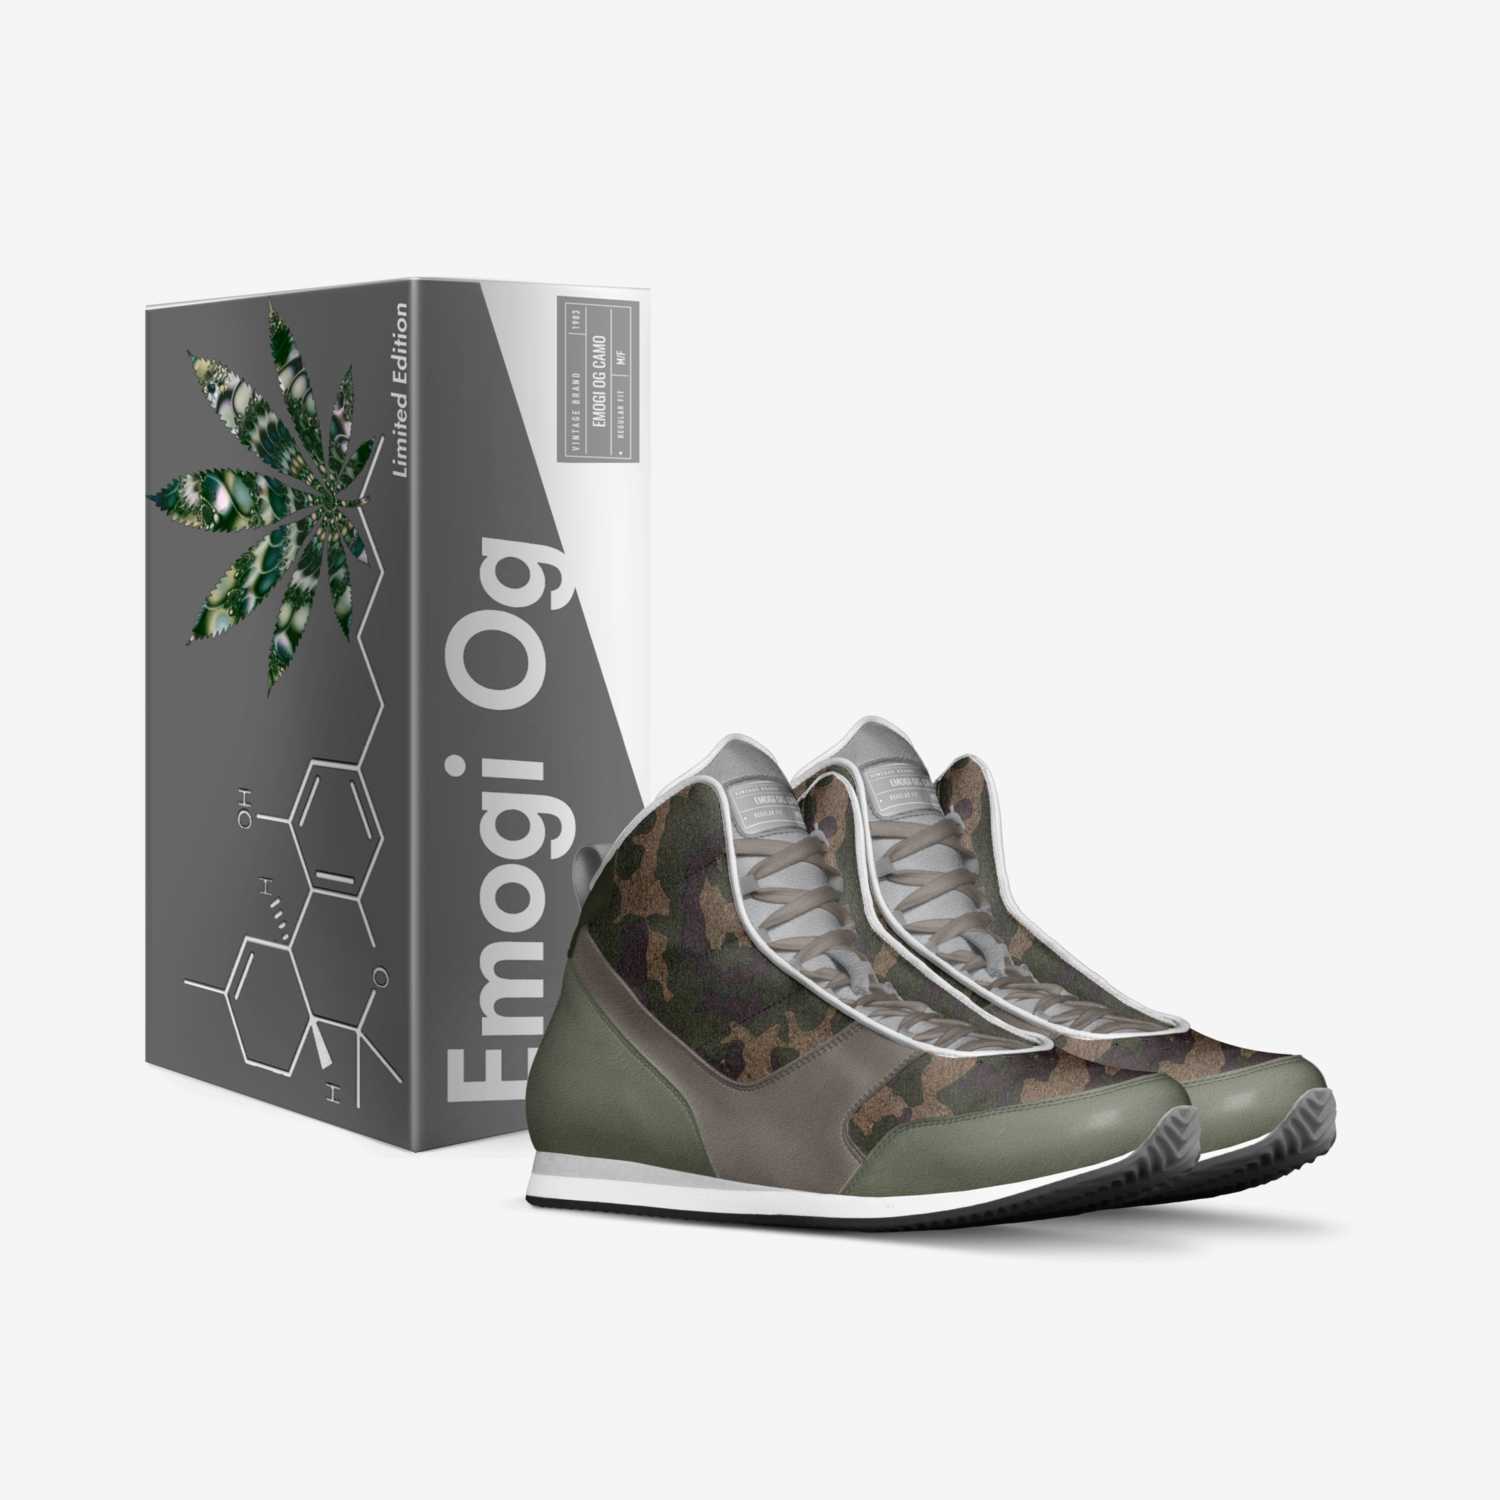 Emogi Og Camo custom made in Italy shoes by Jennifer Hollywood | Box view